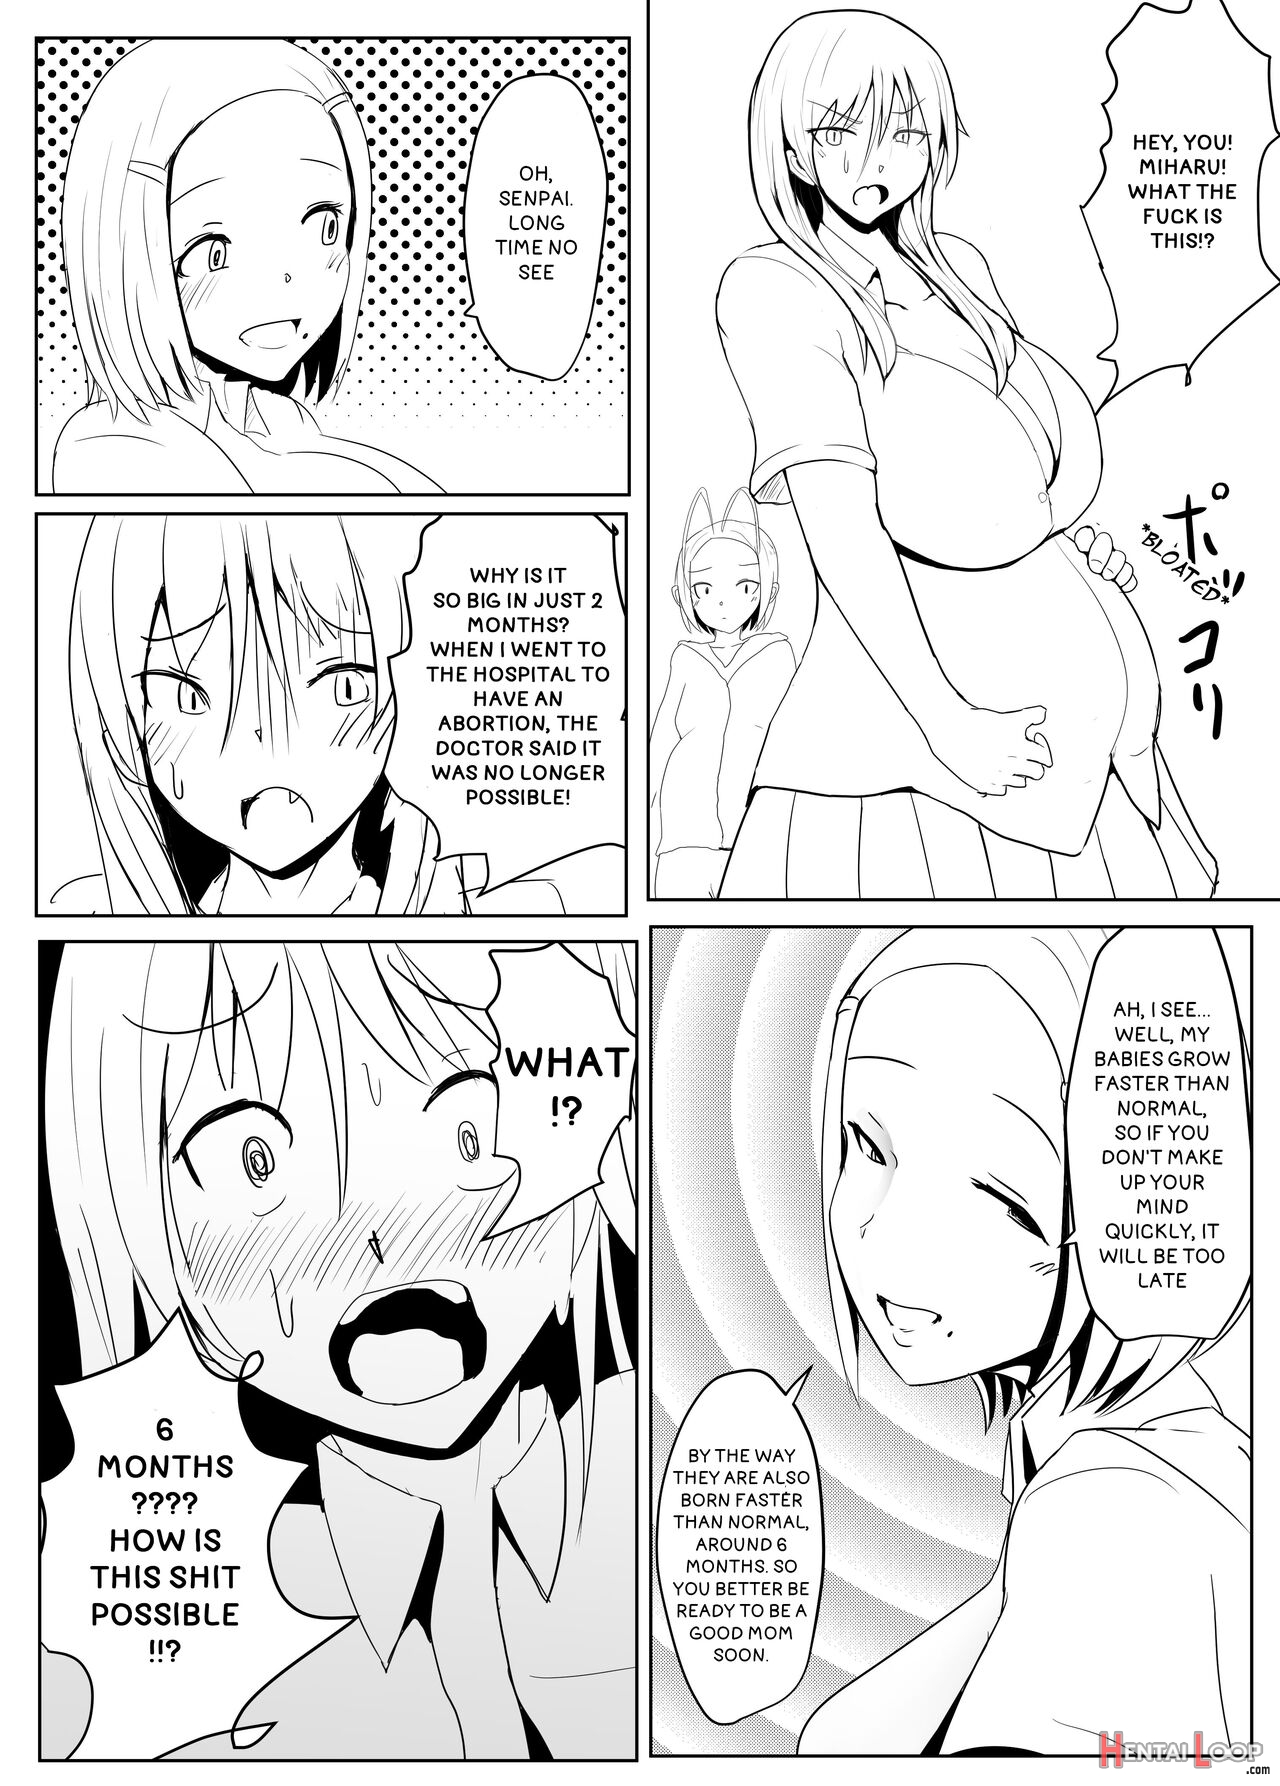 The Mating Diary Of An Easy Futanari Girl ~girls-only Breeding Meeting - Part Three, Ep 2~ page 7